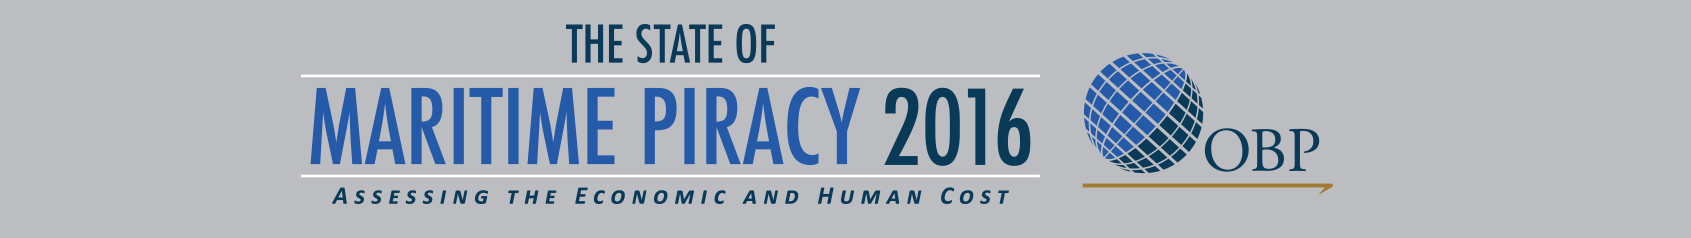 12state of piracy 2016 logo banner